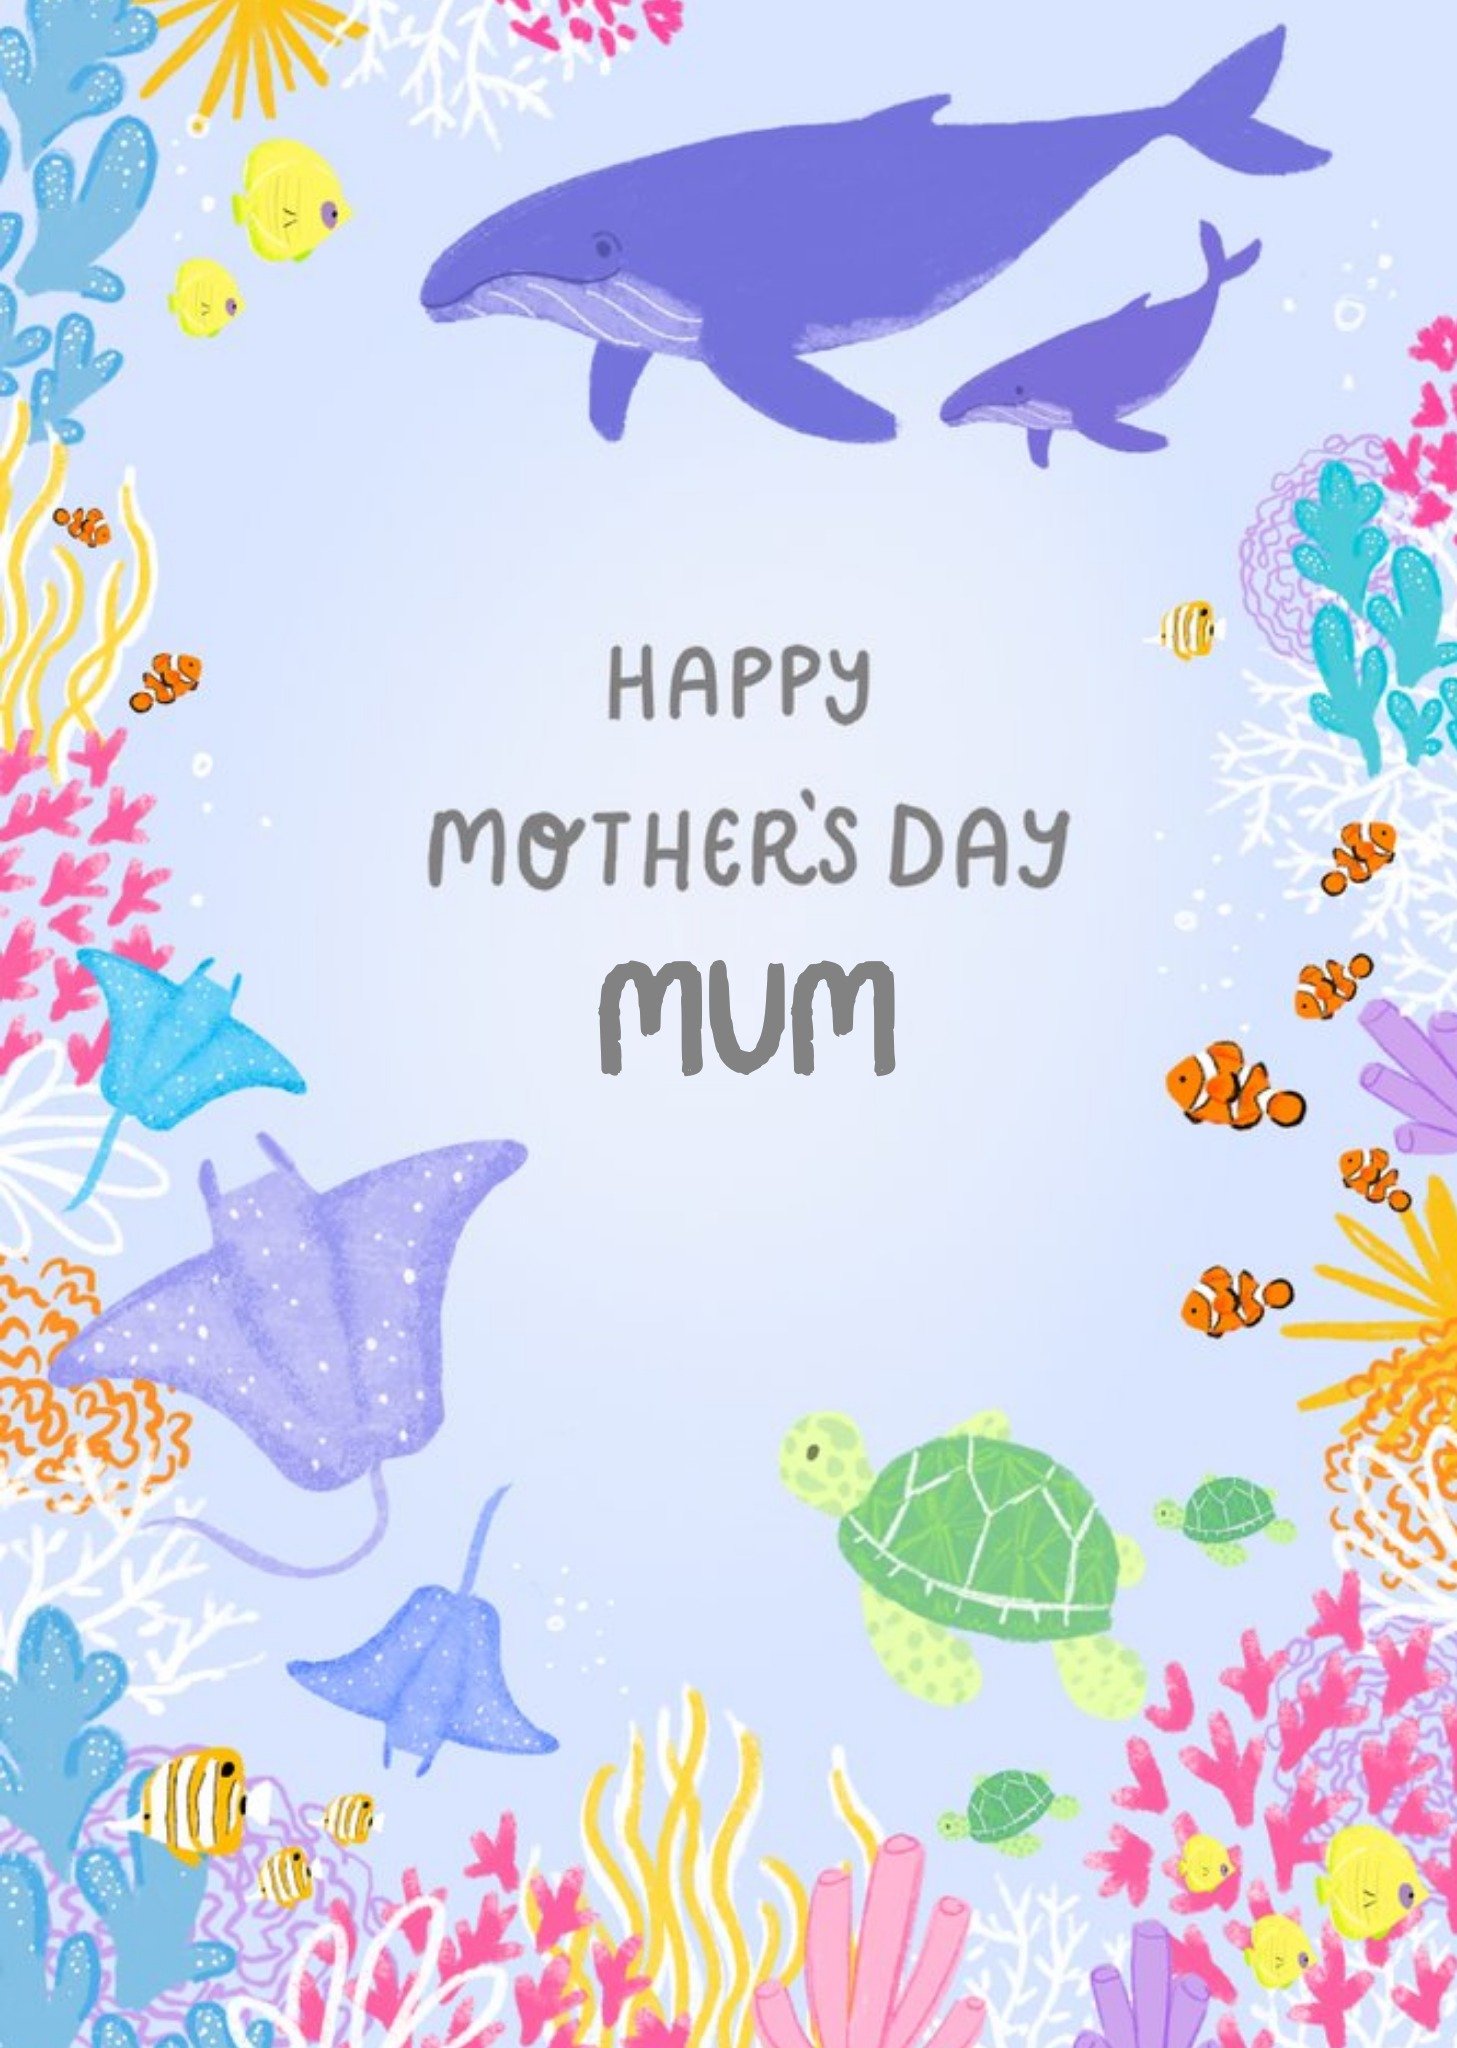 Moonpig Millicent Venton Customisable Illustrated Sea Life Mother's Day Card Ecard